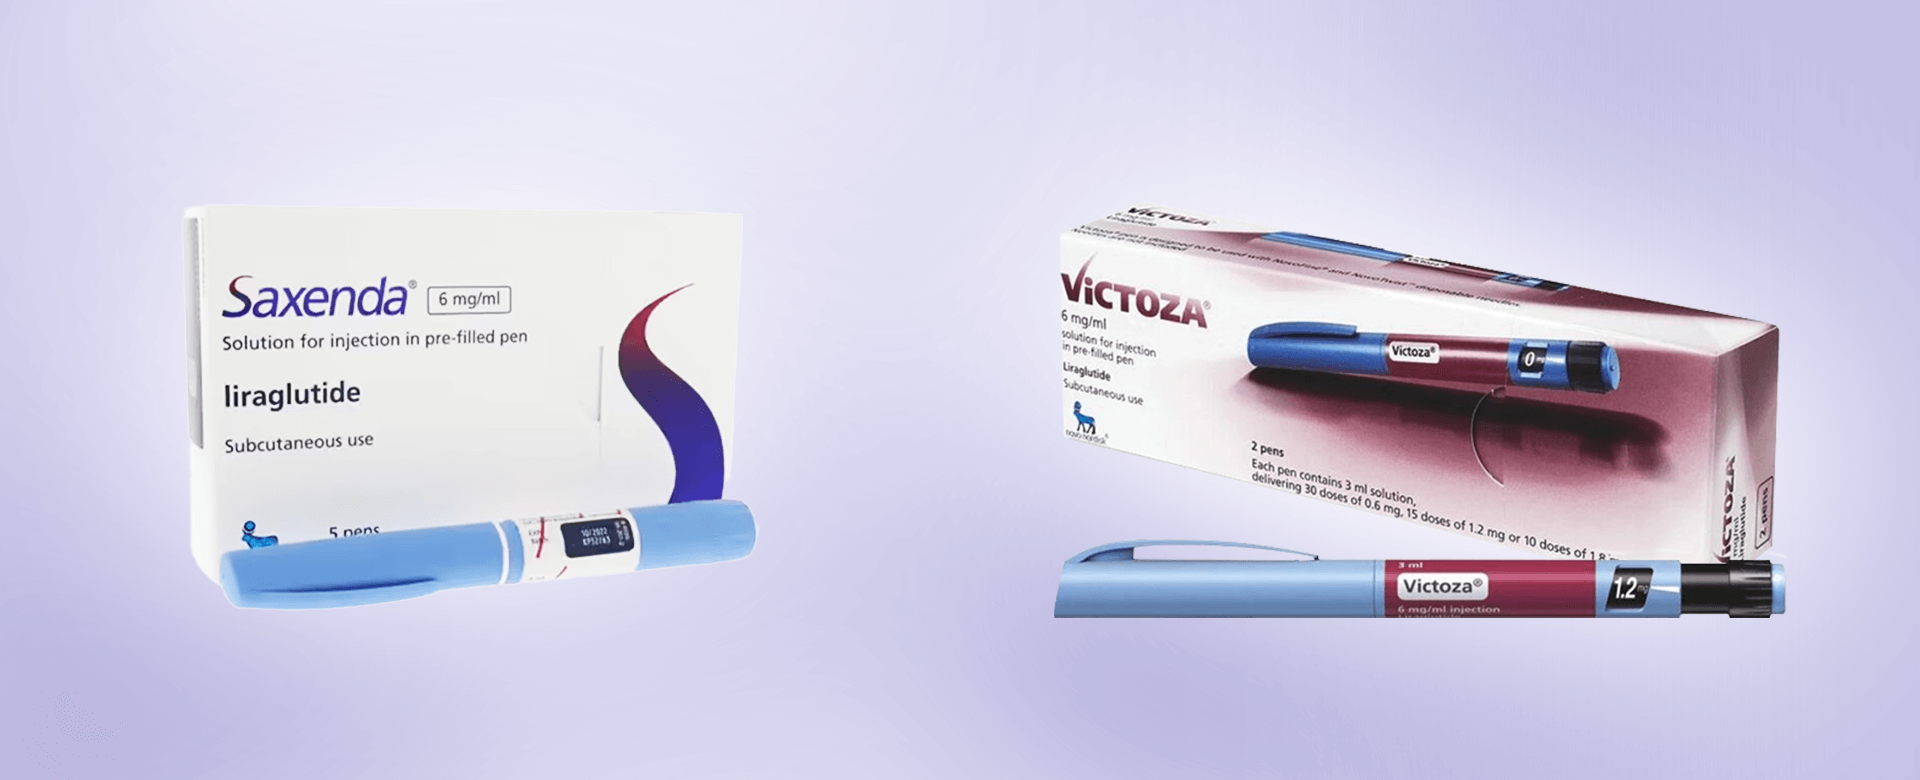 Comparison of Saxenda and Victoza Pens for Injection